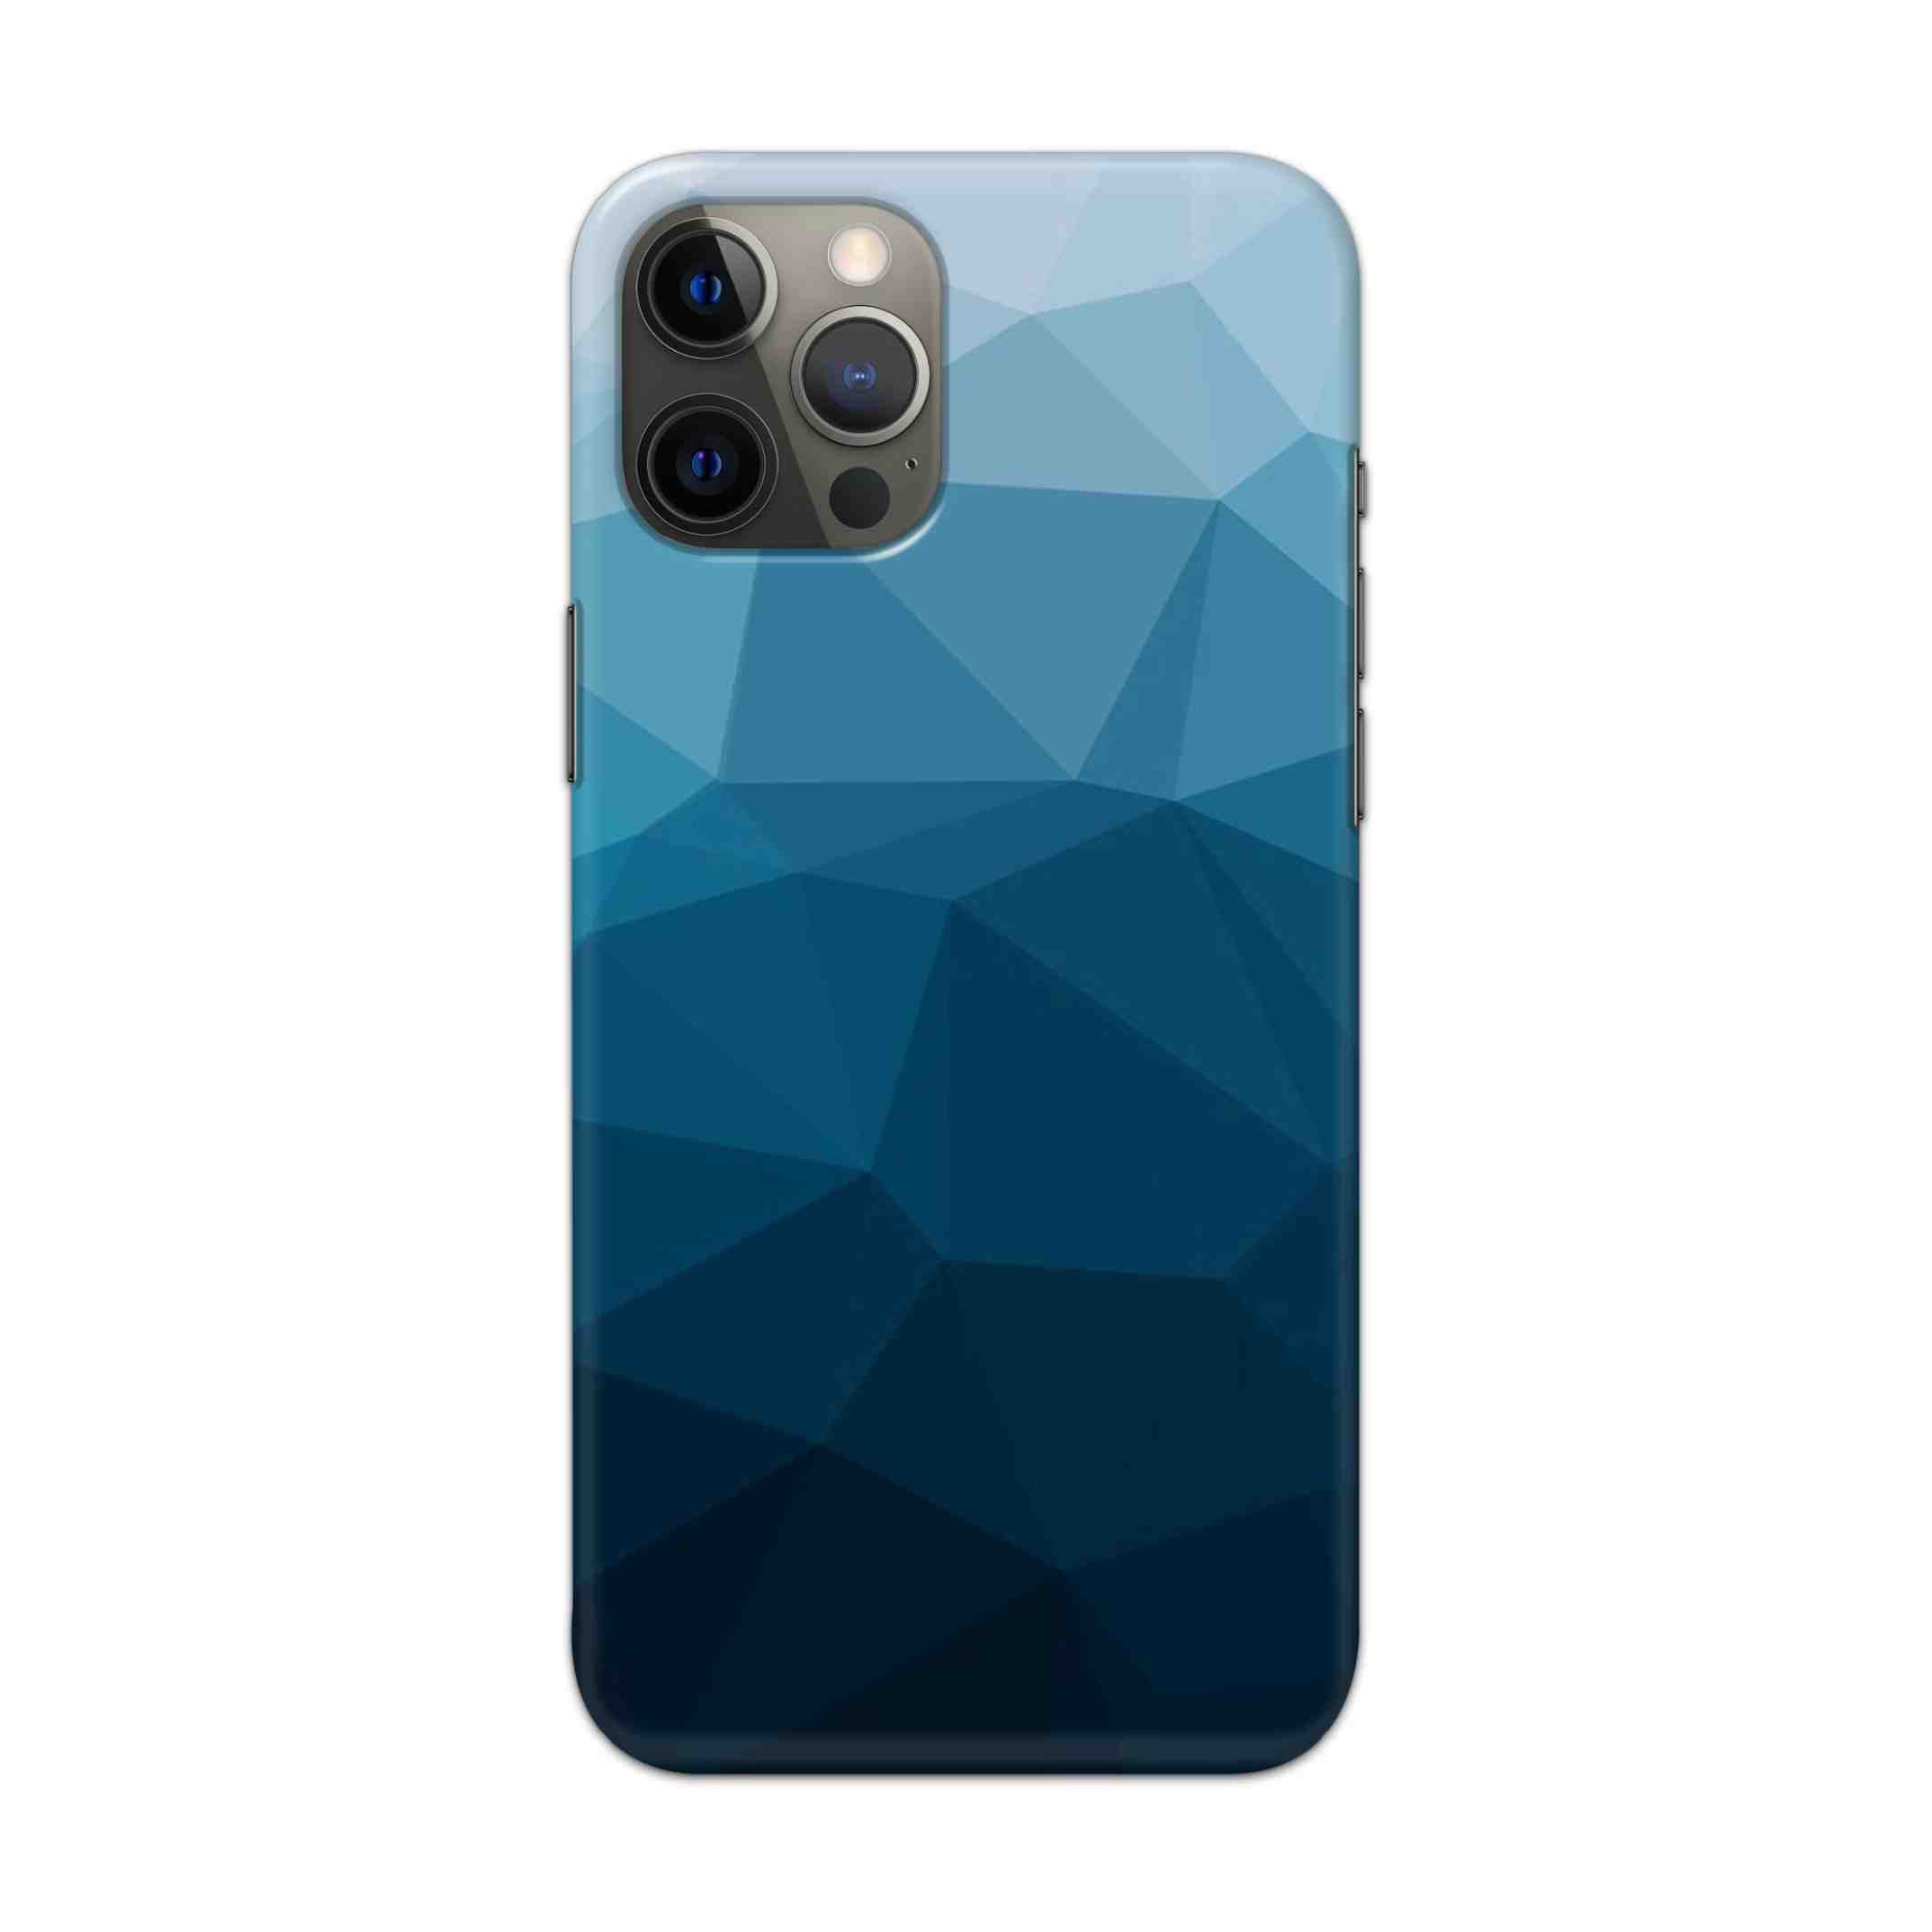 Buy Blue Texture Hard Back Mobile Phone Case Cover For Apple iPhone 12 pro Online